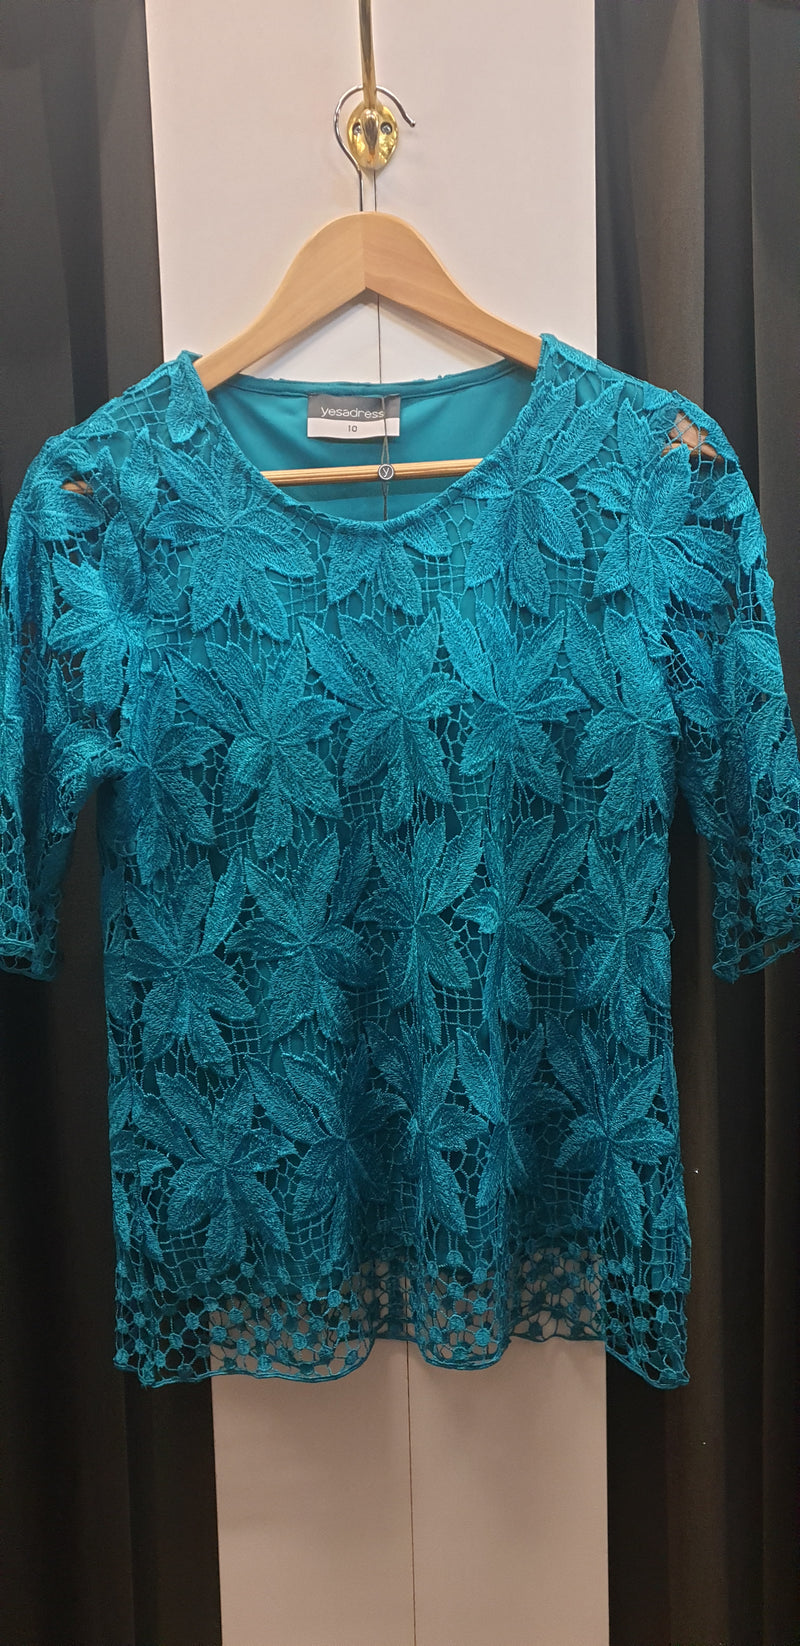 Yesadress woven lace half sleeve Top in Teal Y321